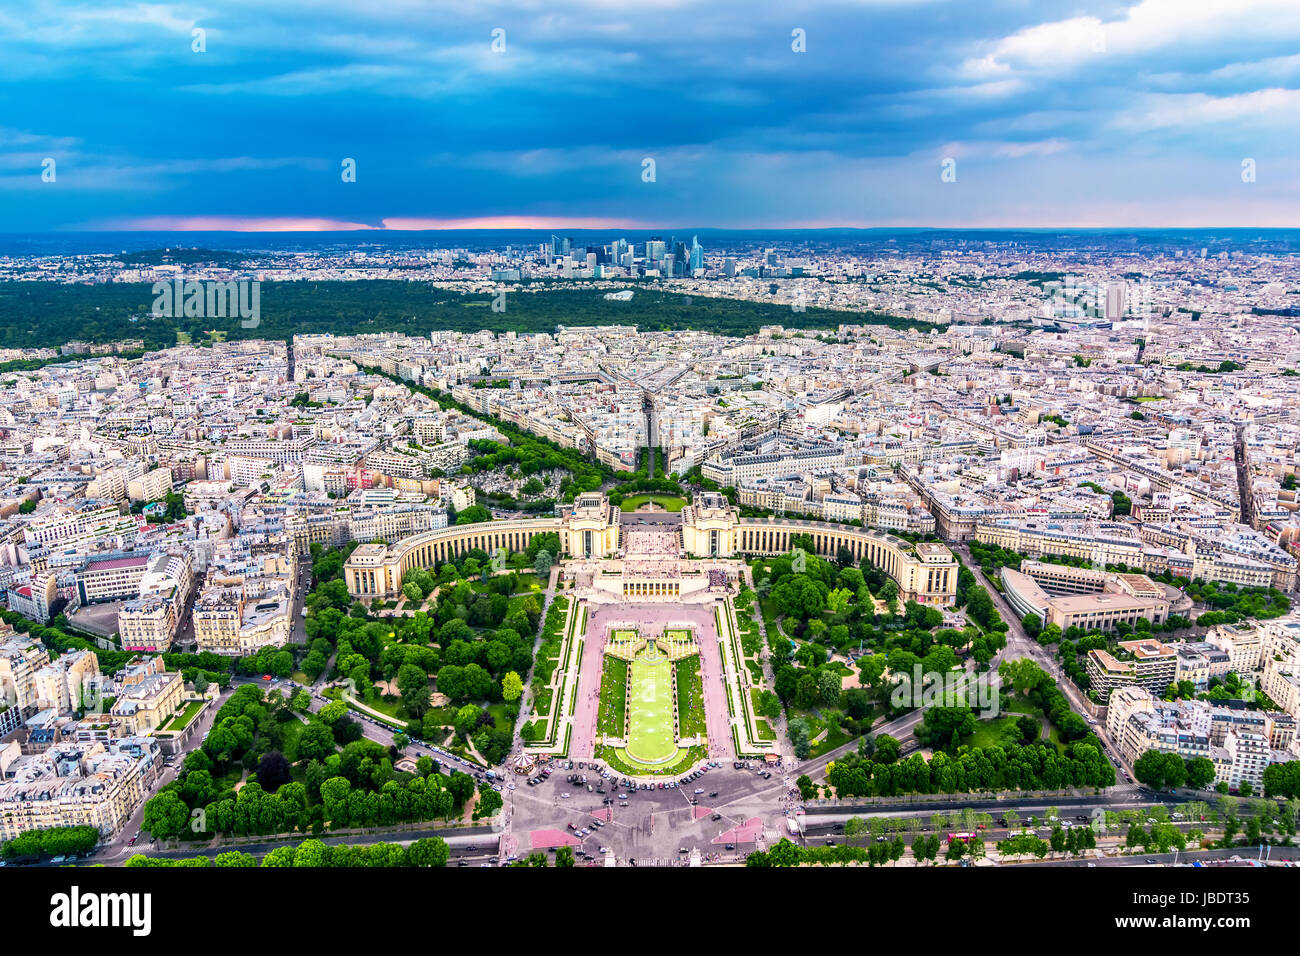 Paris over-view from Eiffel Tower Stock Photo